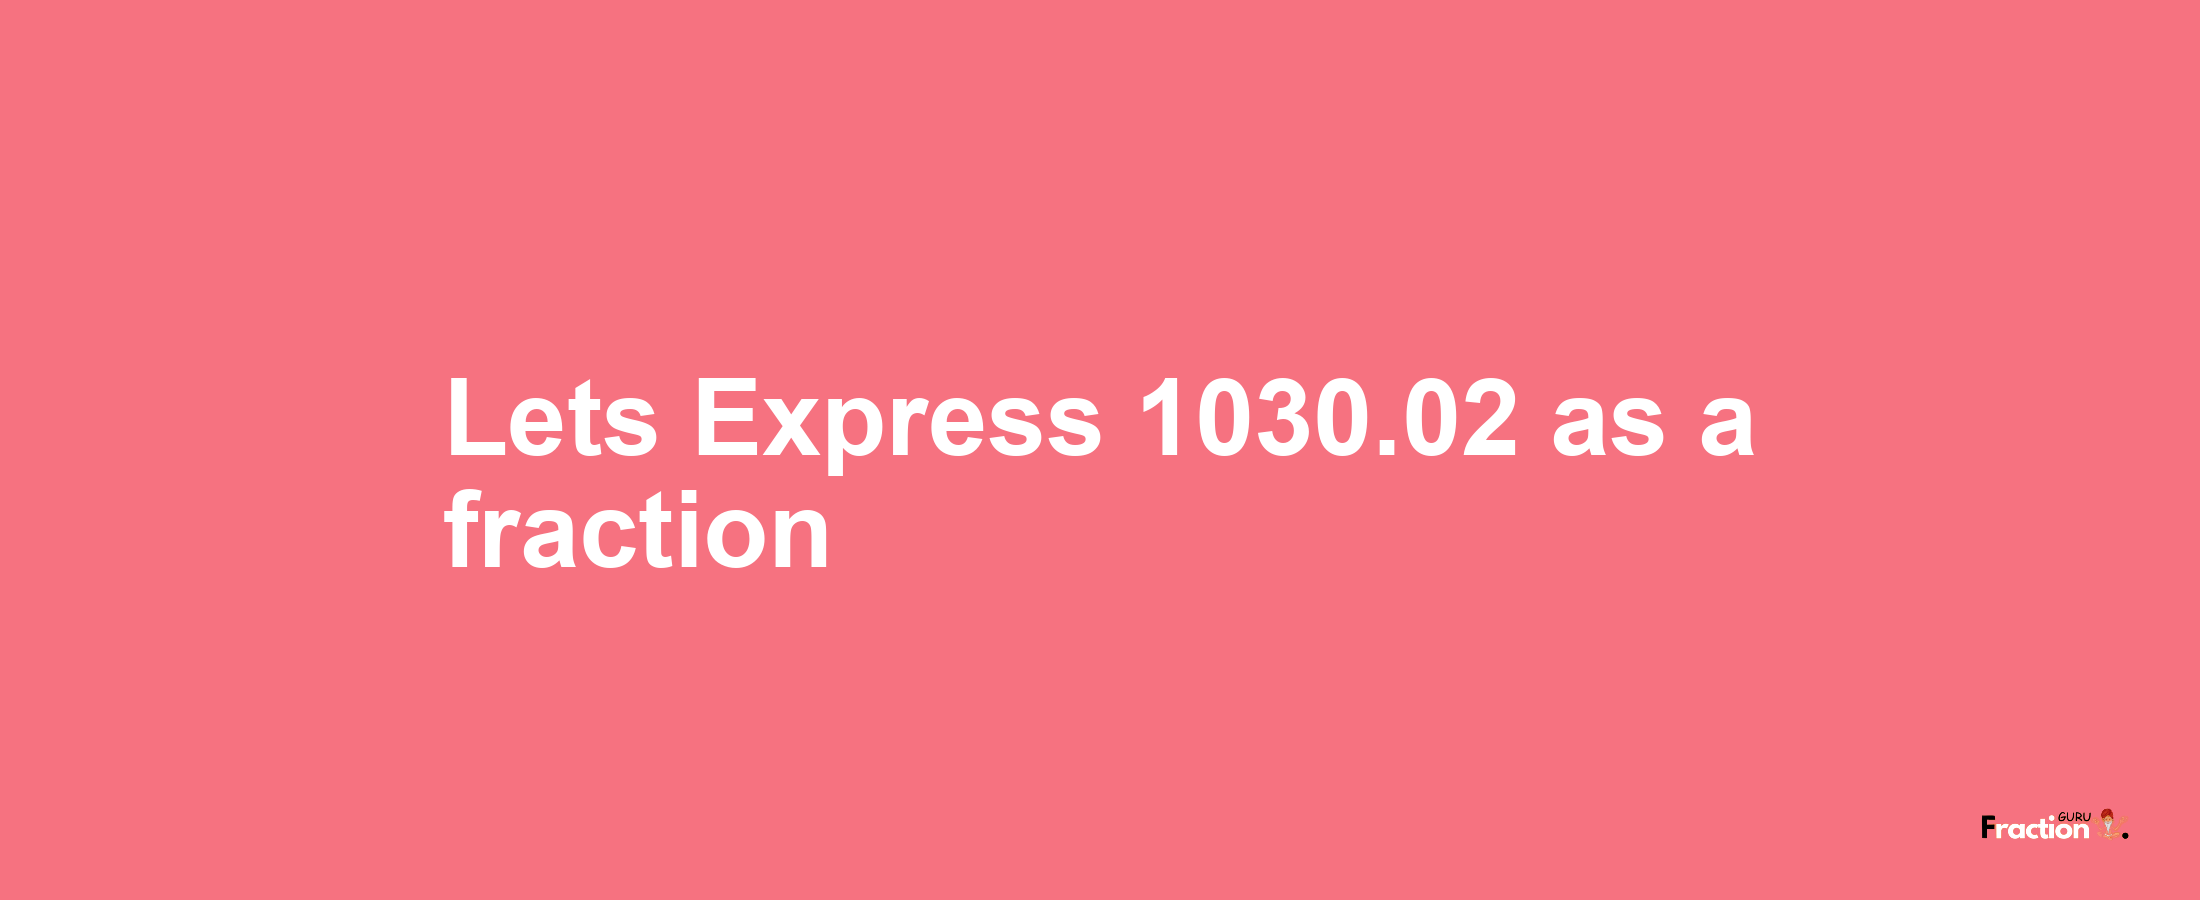 Lets Express 1030.02 as afraction